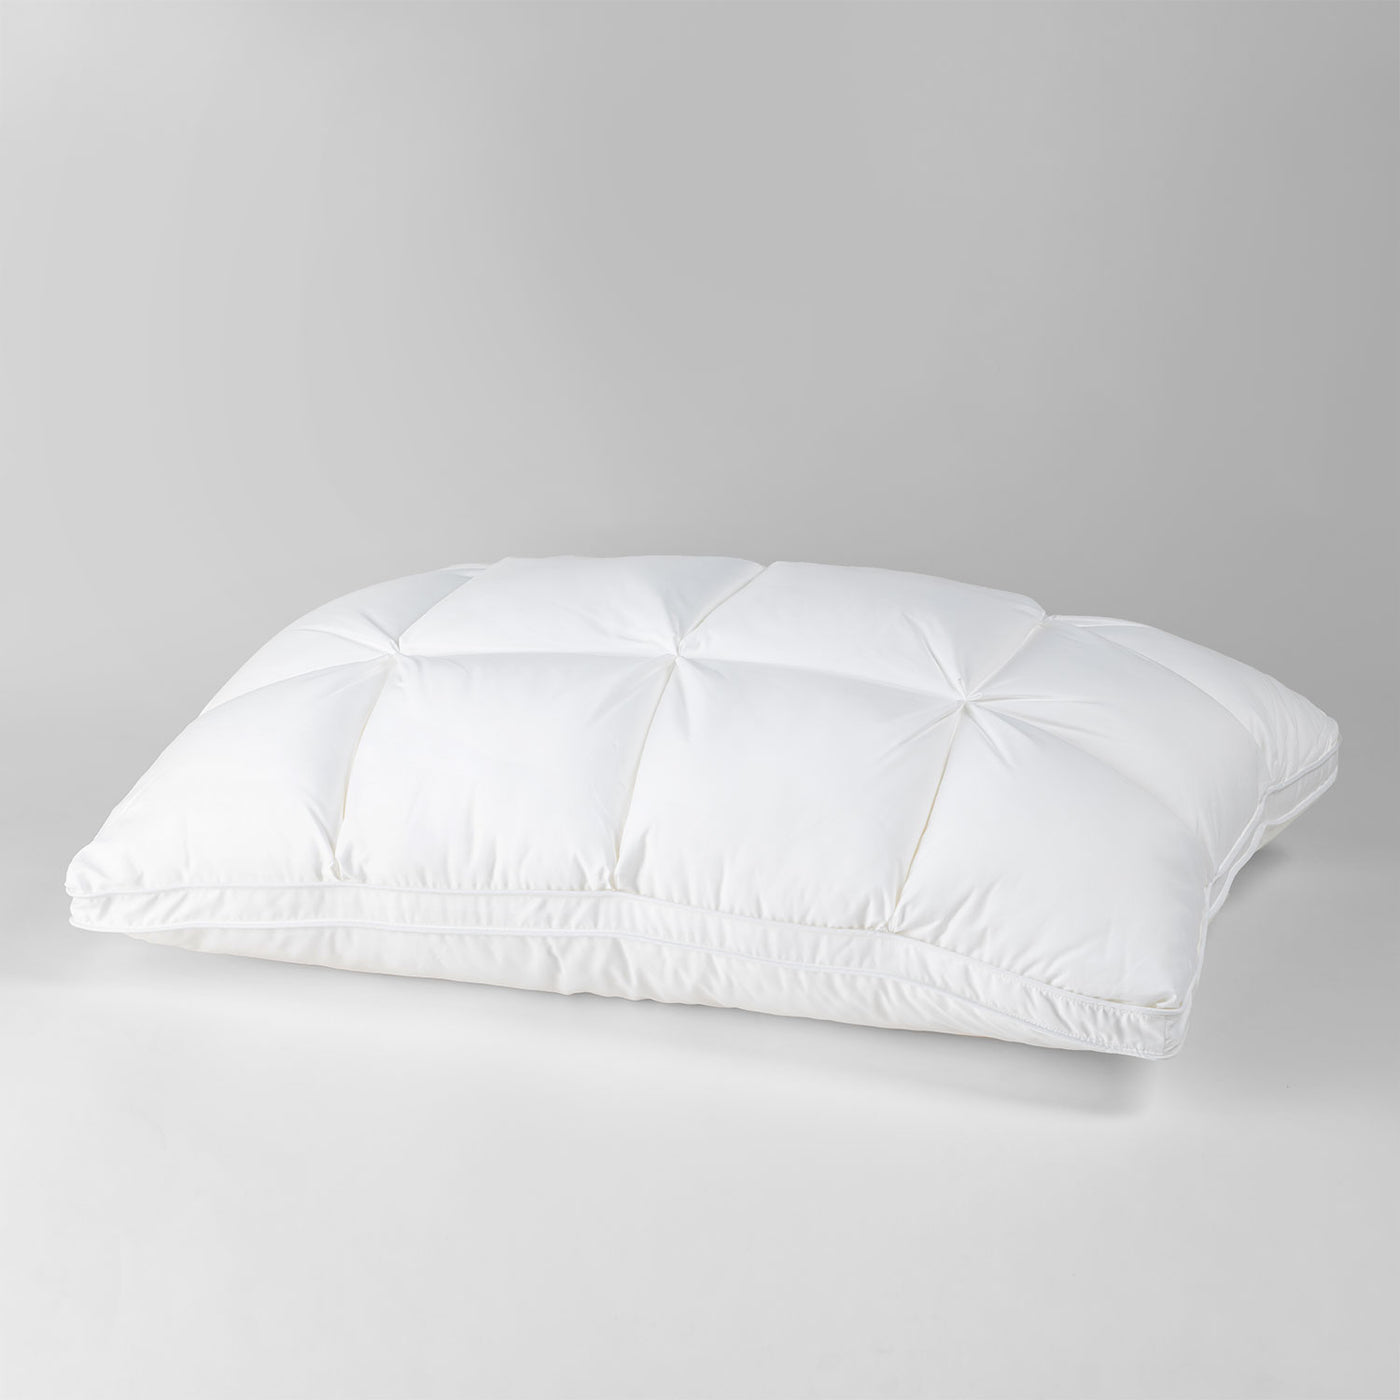 Cervical 3 Layer Hypoallergic Pillow